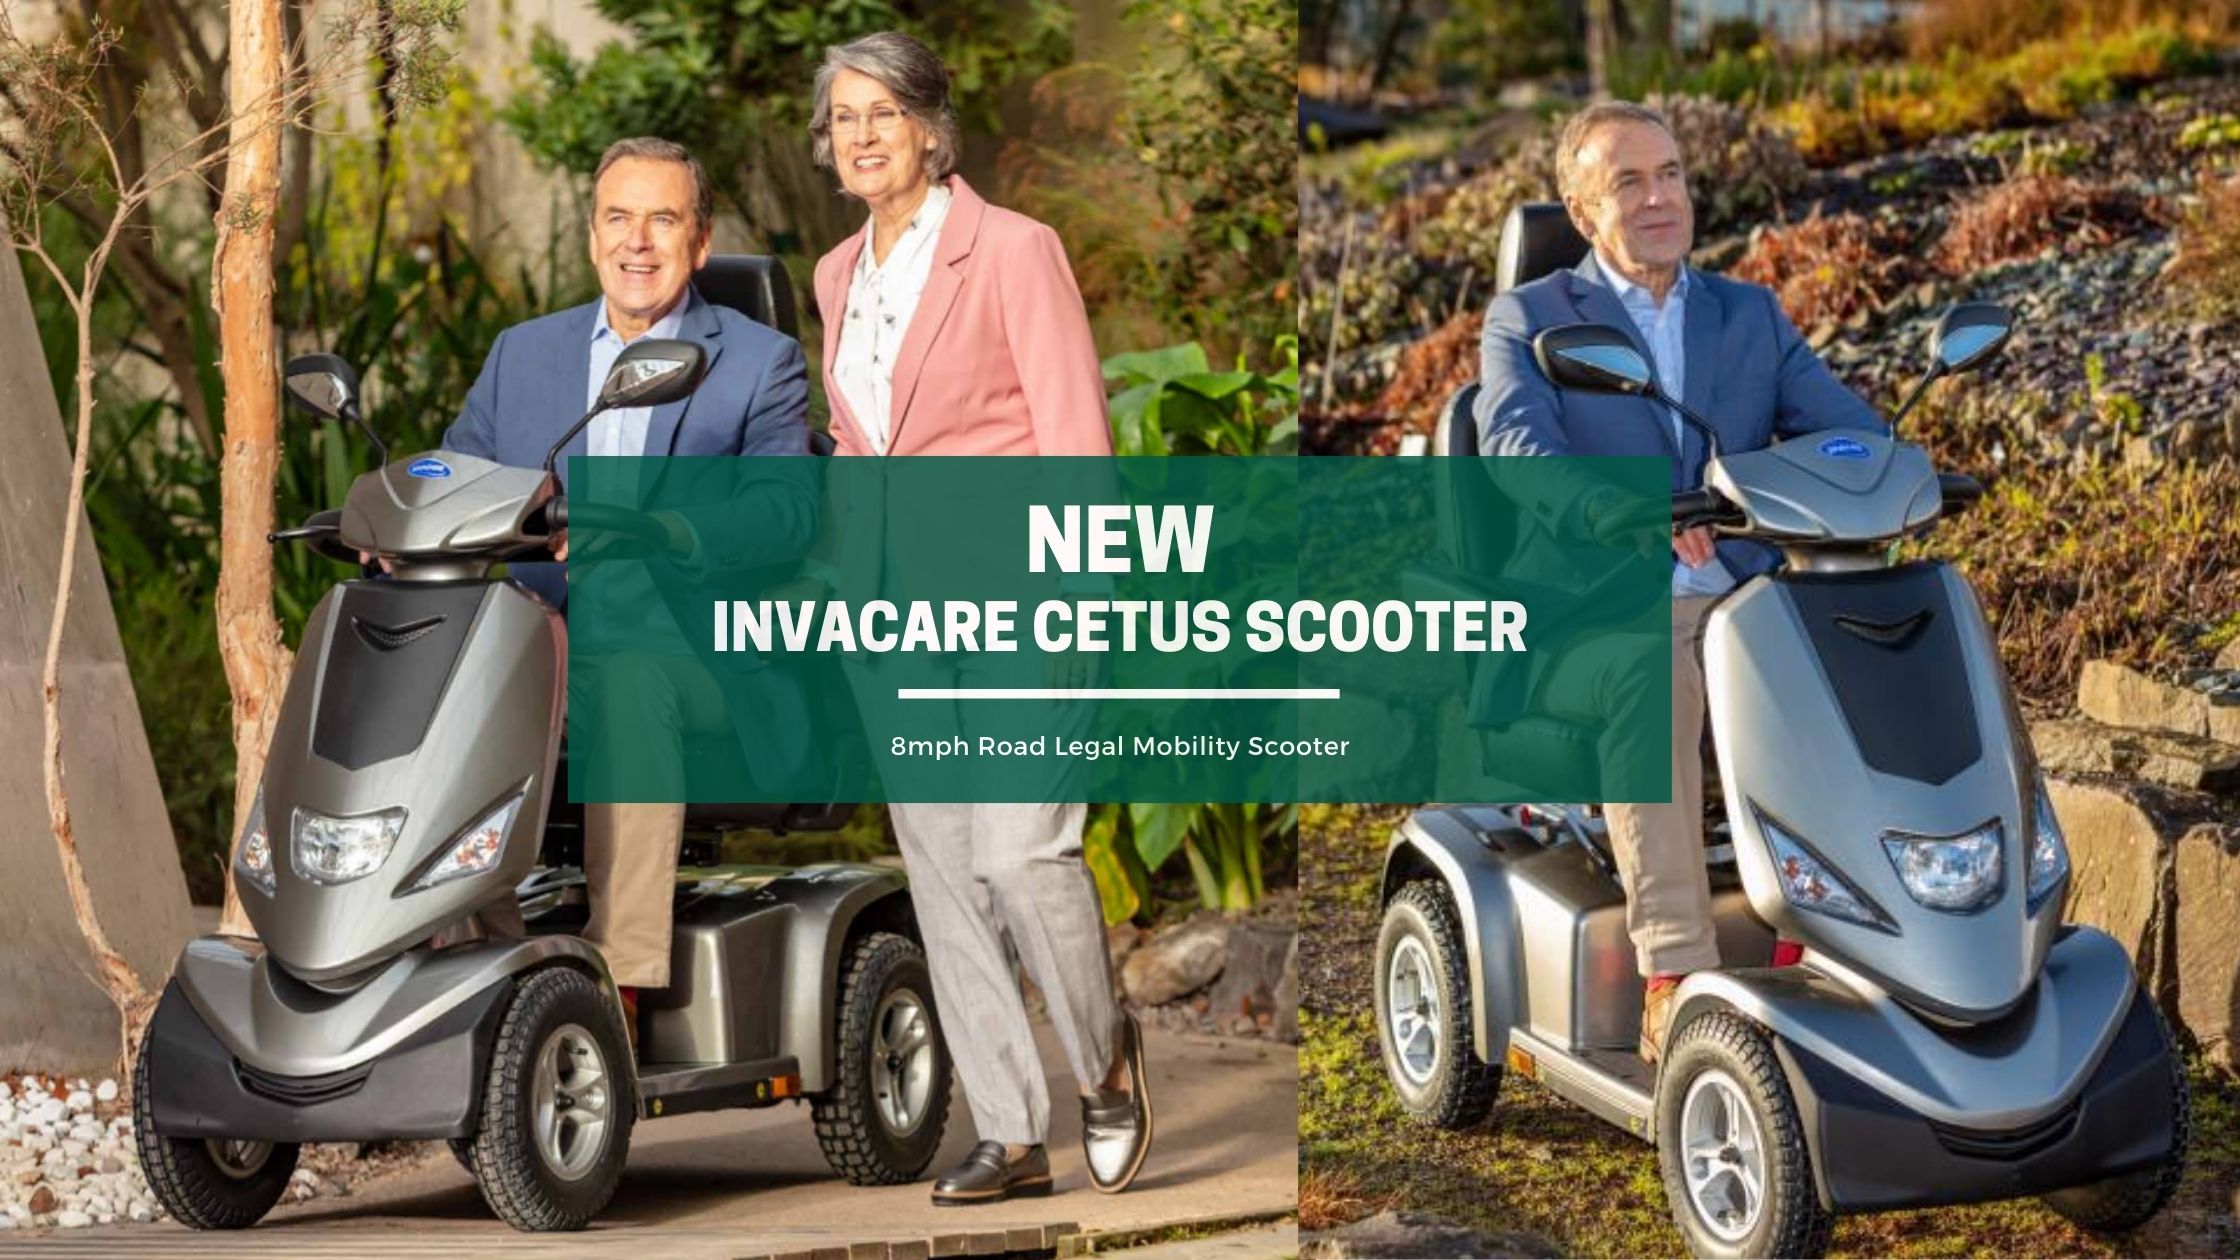 New Invacare Cetus Scooter available to buy online